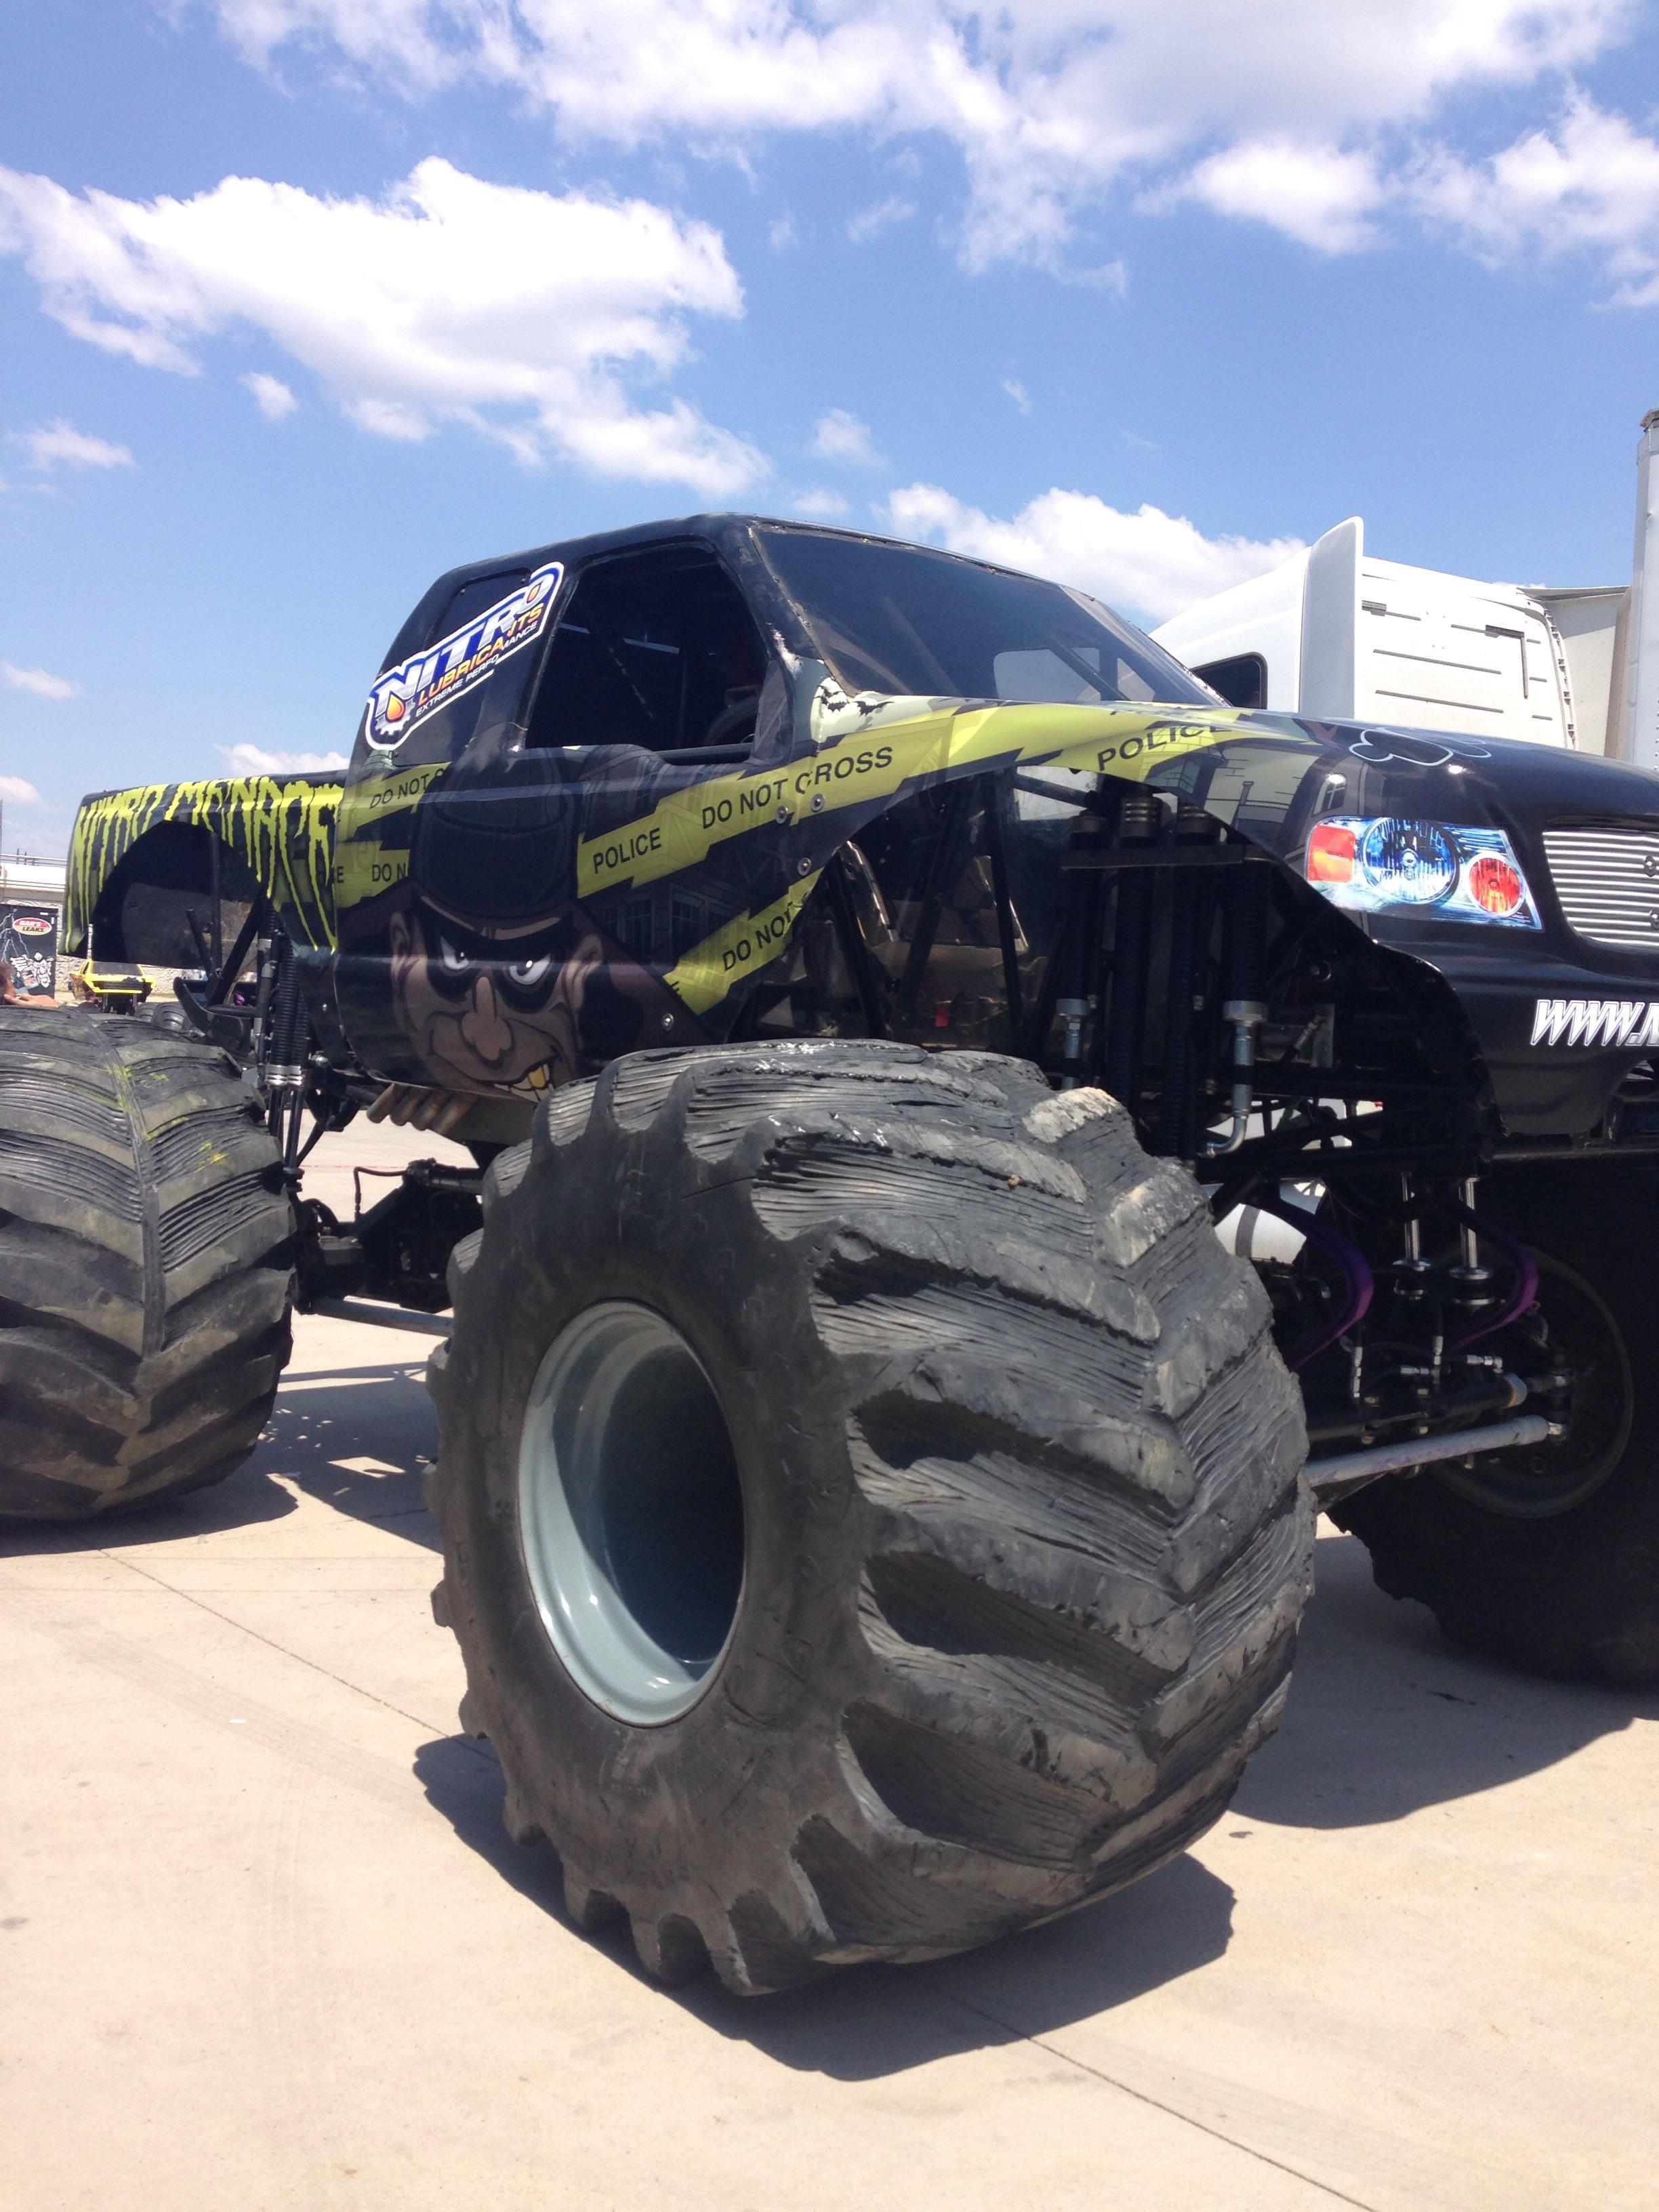 My uncles monster truck. Murica!